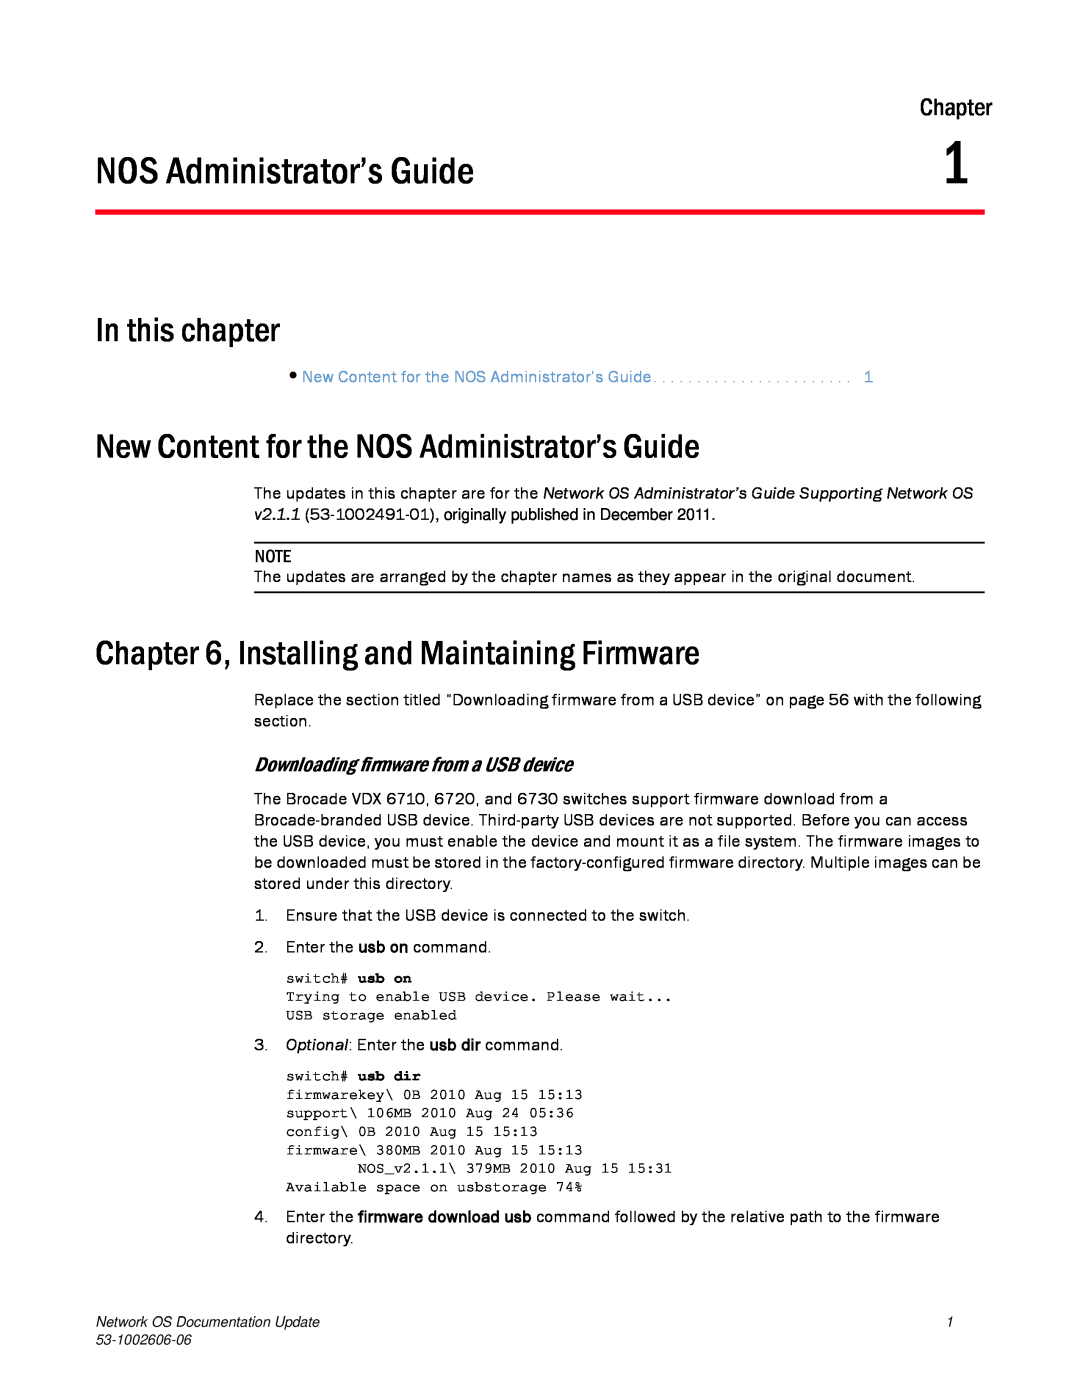 Brocade Communications Systems 2.1 New Content for the NOS Administrator’s Guide, Installing and Maintaining Firmware 